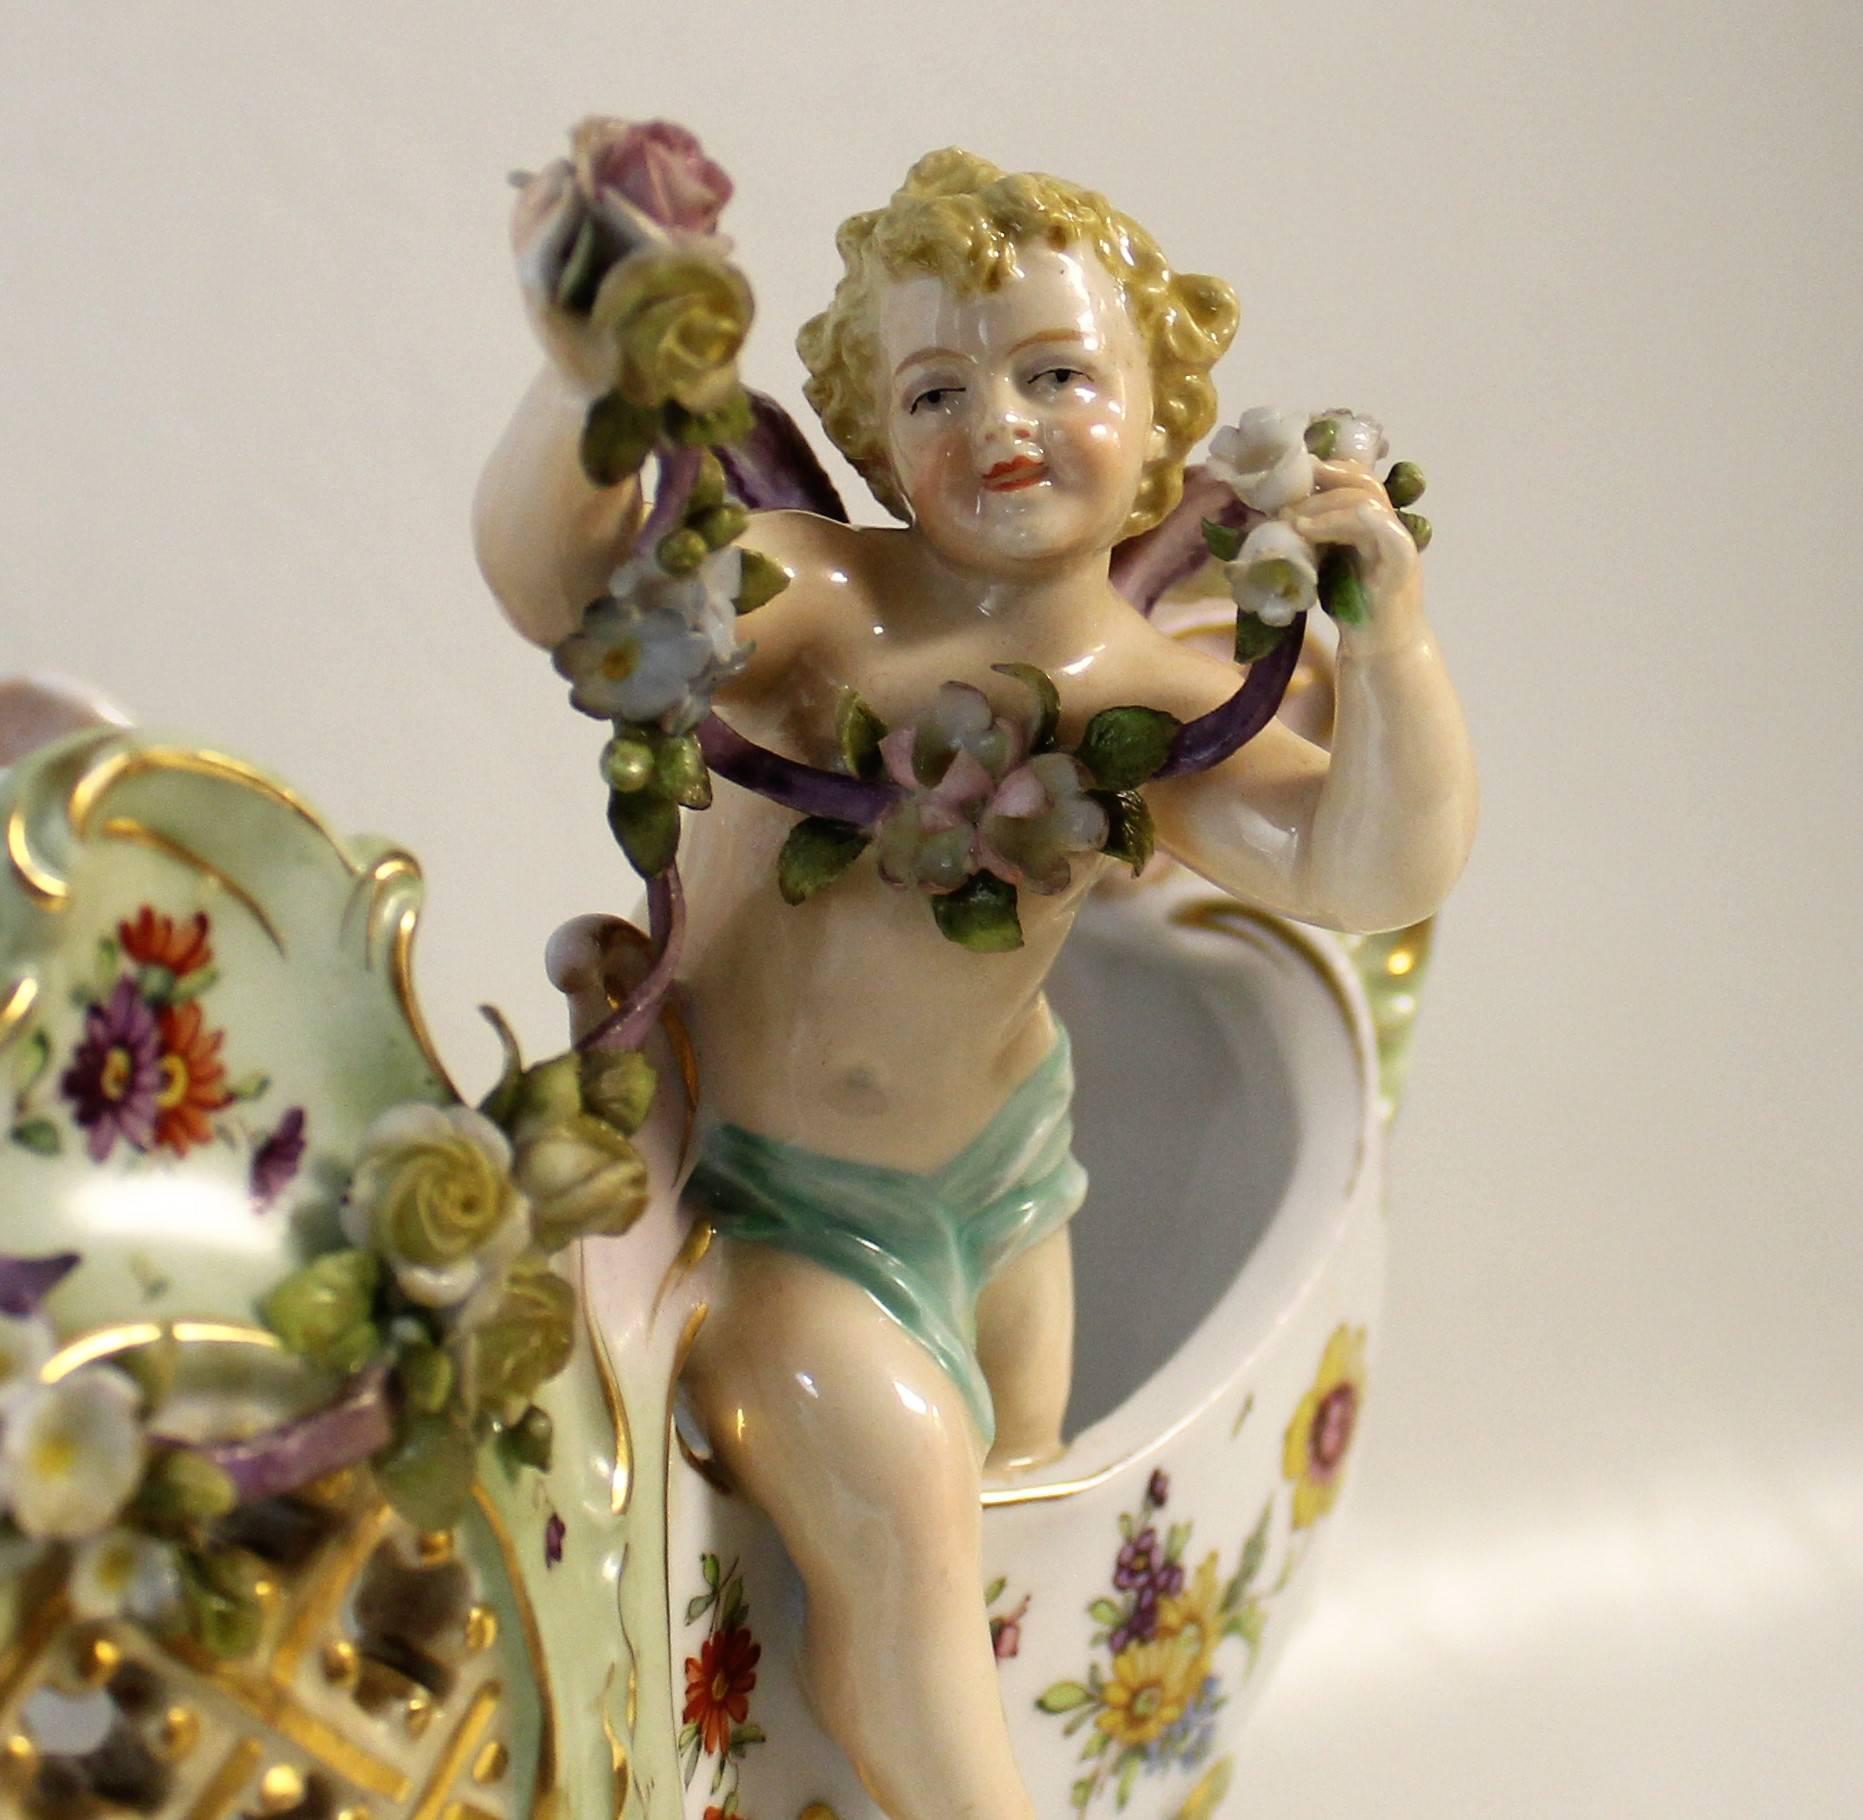 E & A Muller 'Corona' porcelain figural cherub Jardinière or centerpiece bowl.

19th century Austrian porcelain centerpiece bowl or jardiniere beautifully enamelled in rich colors with floral sprays and gilt highlights. This stunning Rococo piece